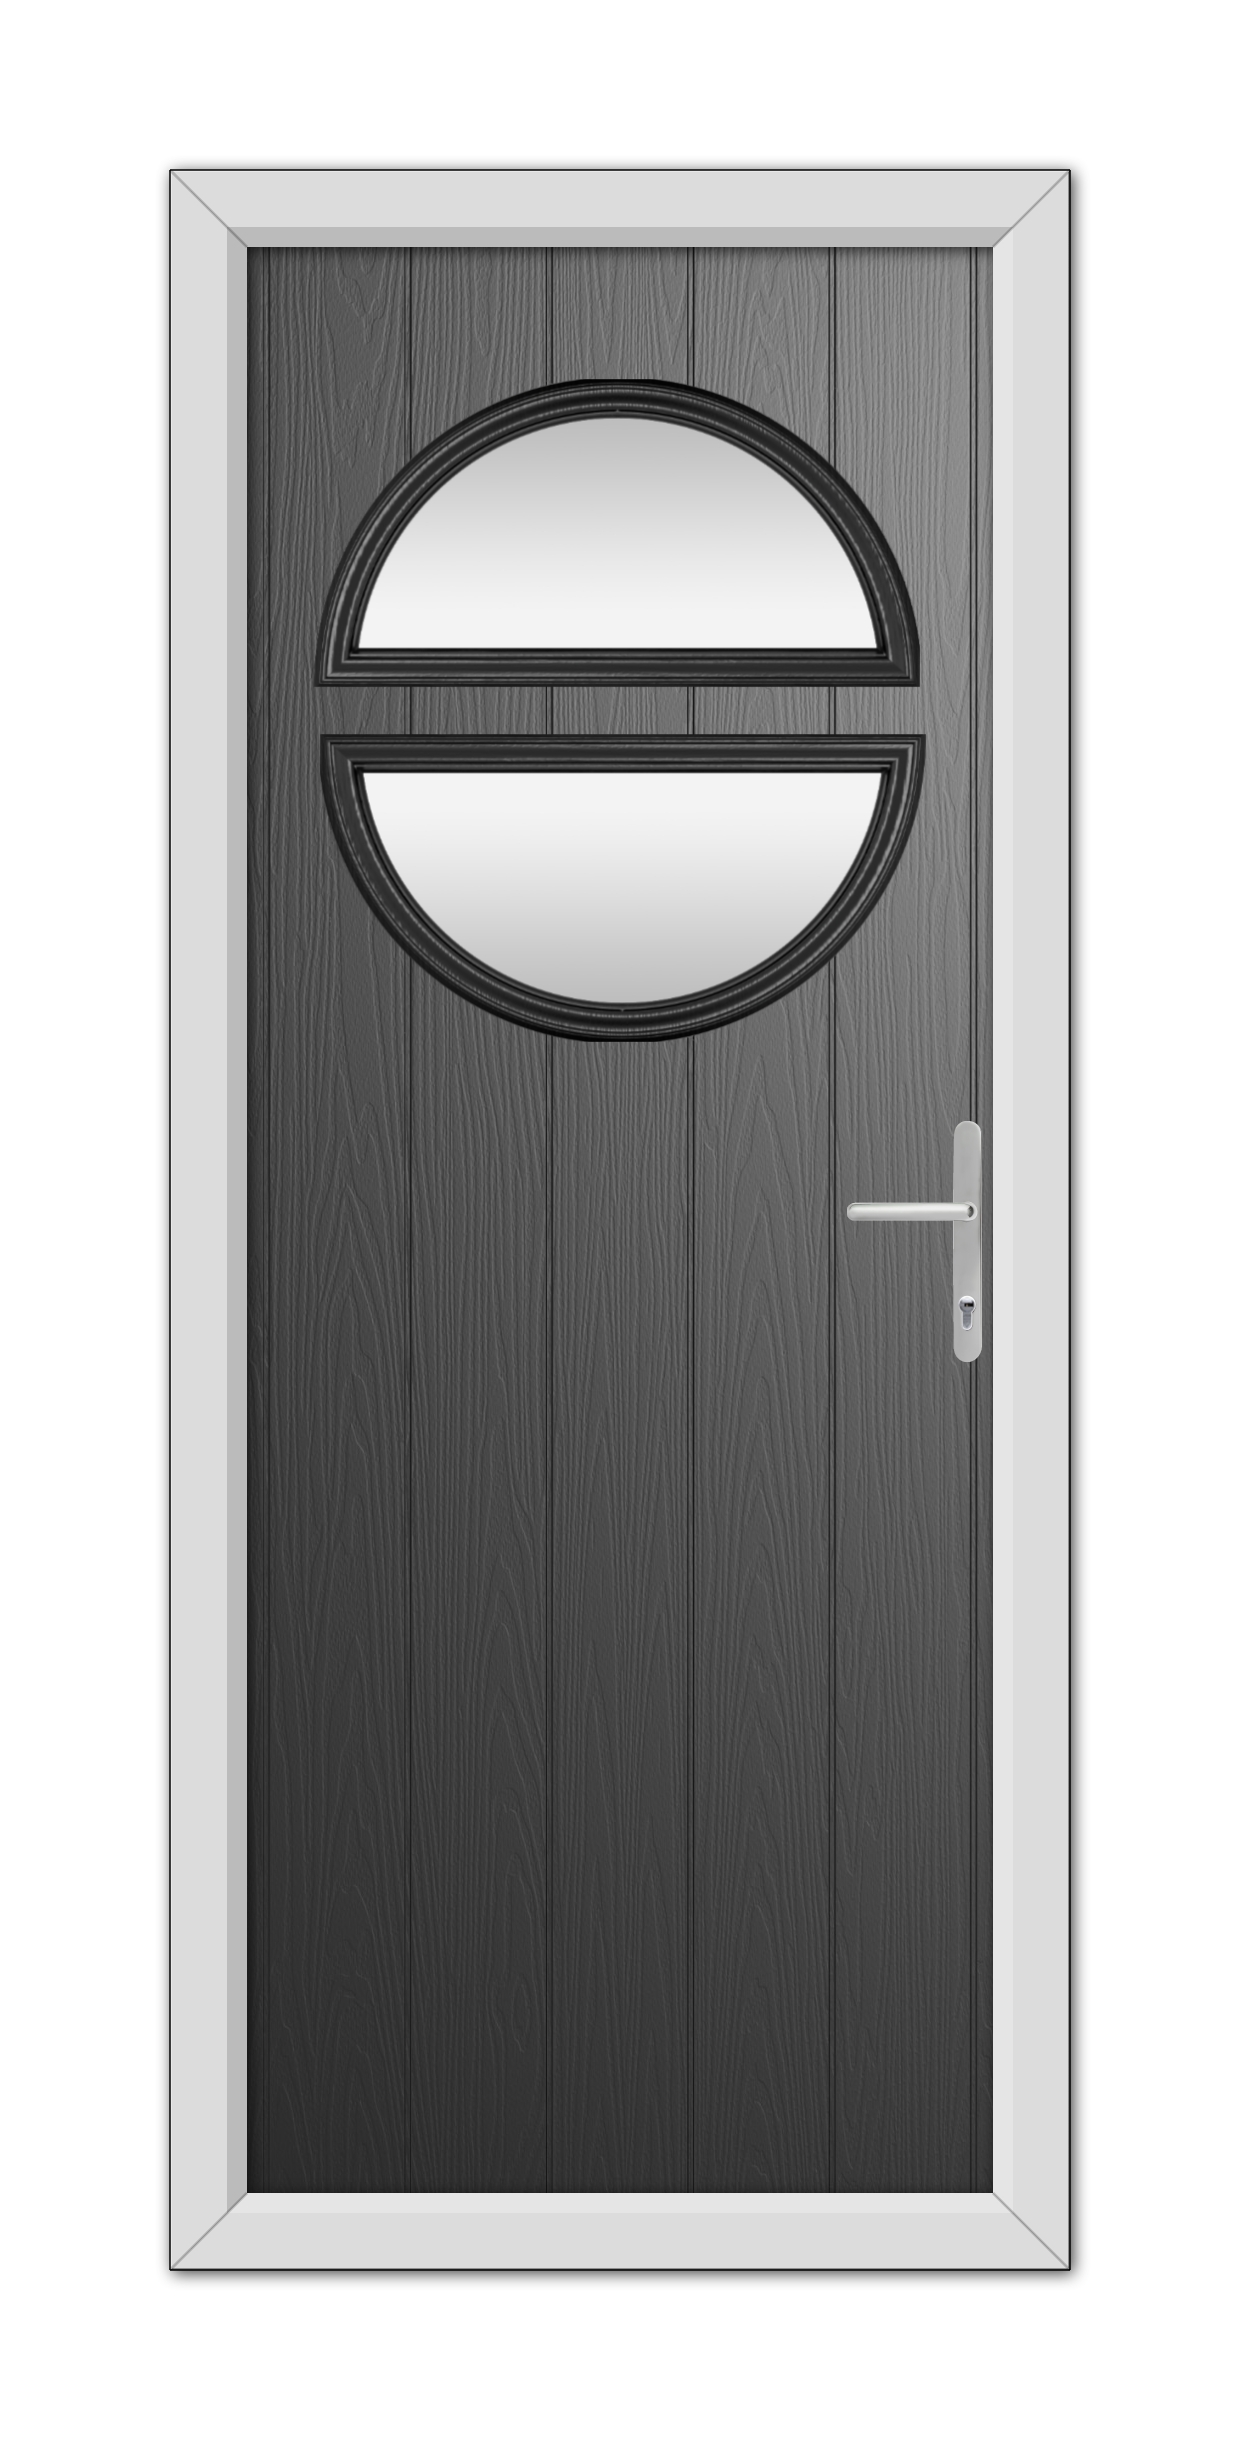 A modern black Kent composite door with an oval glass window and a silver handle, set in a white frame.